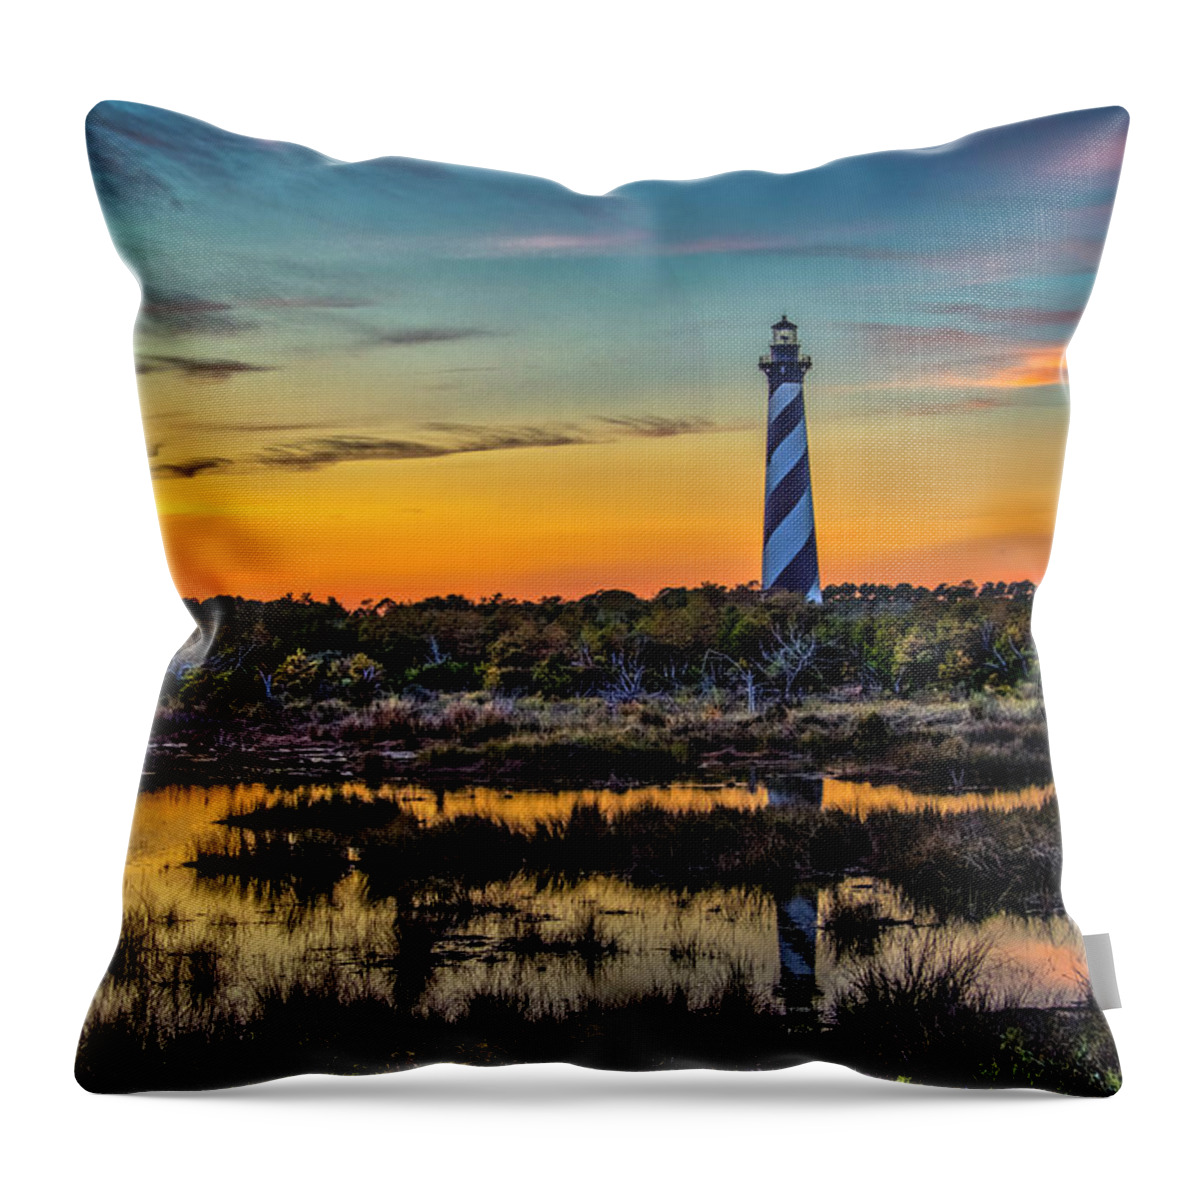 Landscape Throw Pillow featuring the photograph Cape Hatteras Lighthouse by Donald Brown